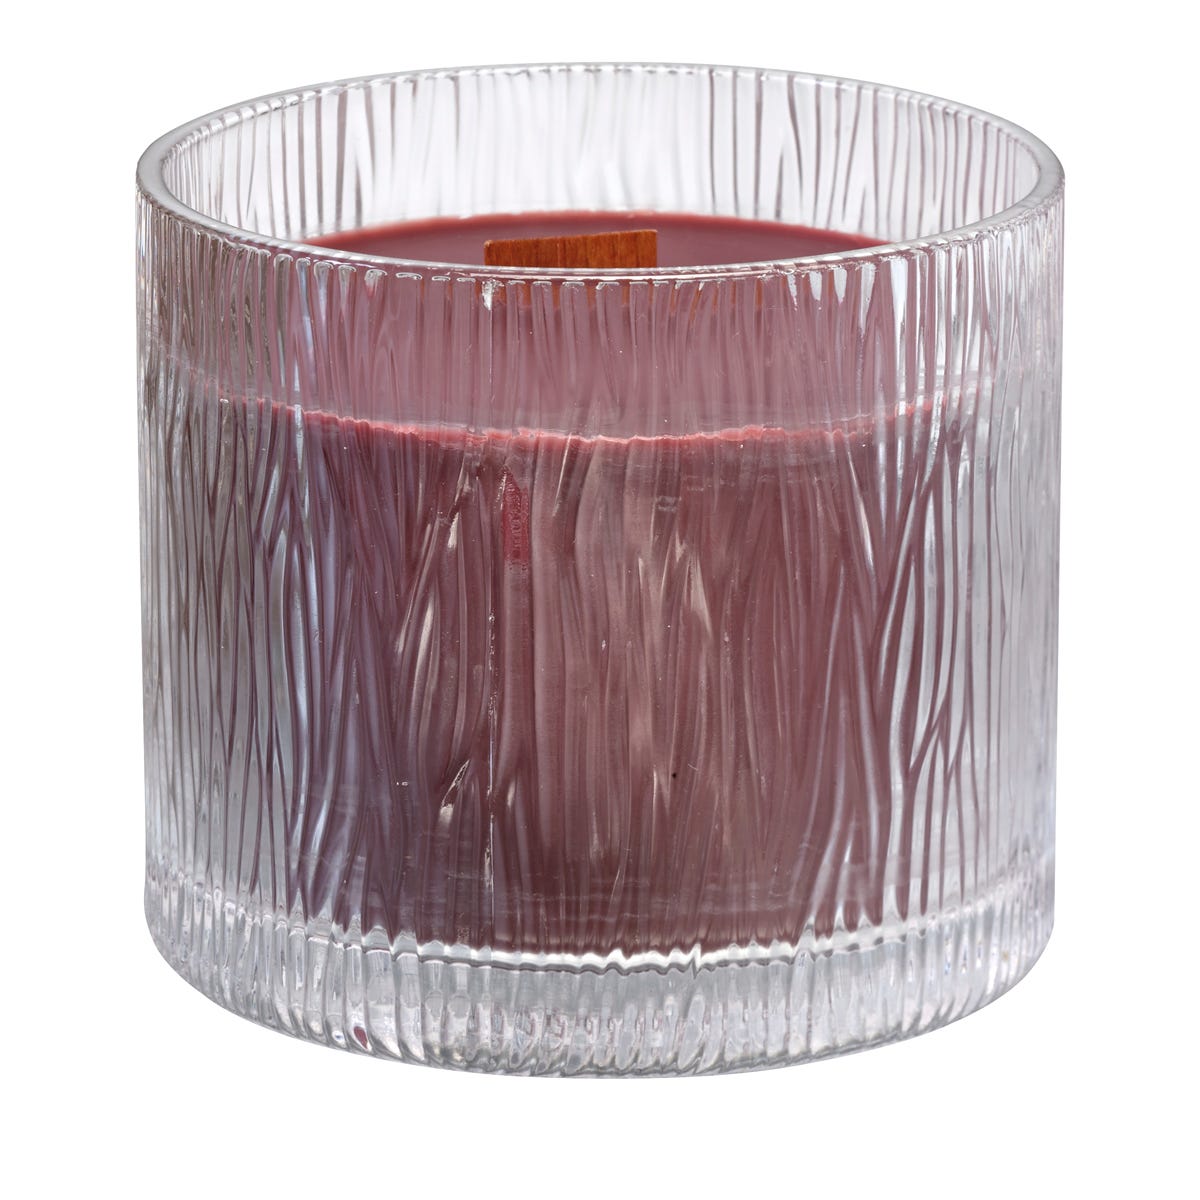 Nature's Light‚™ by PartyLite Tamboti Woods Jar Candle - PartyLite US